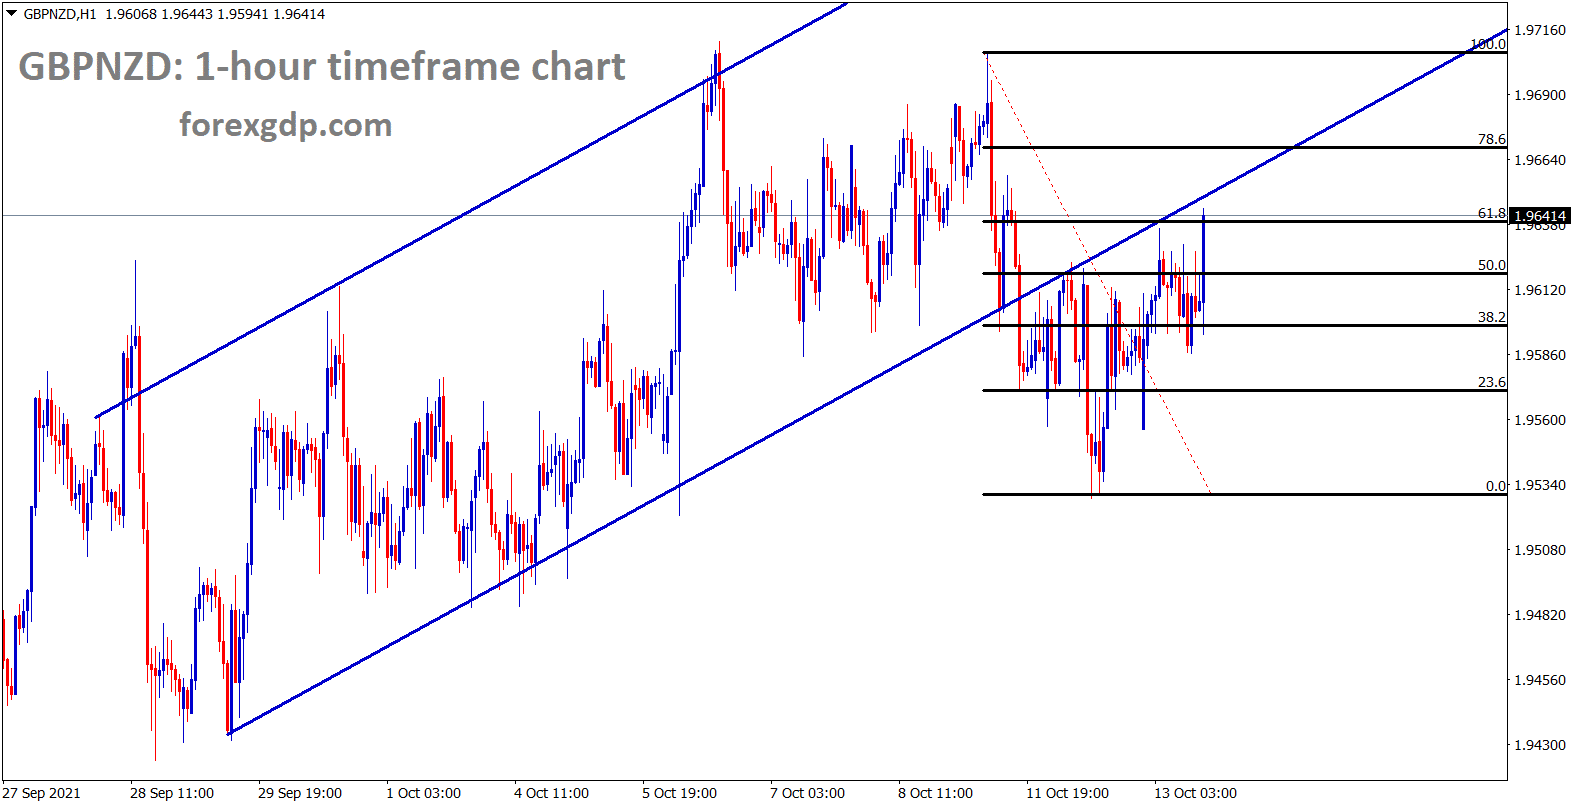 GBPNZD is consolidating at the retest area of the ascending channel range and it has retraced 61 from the previous high